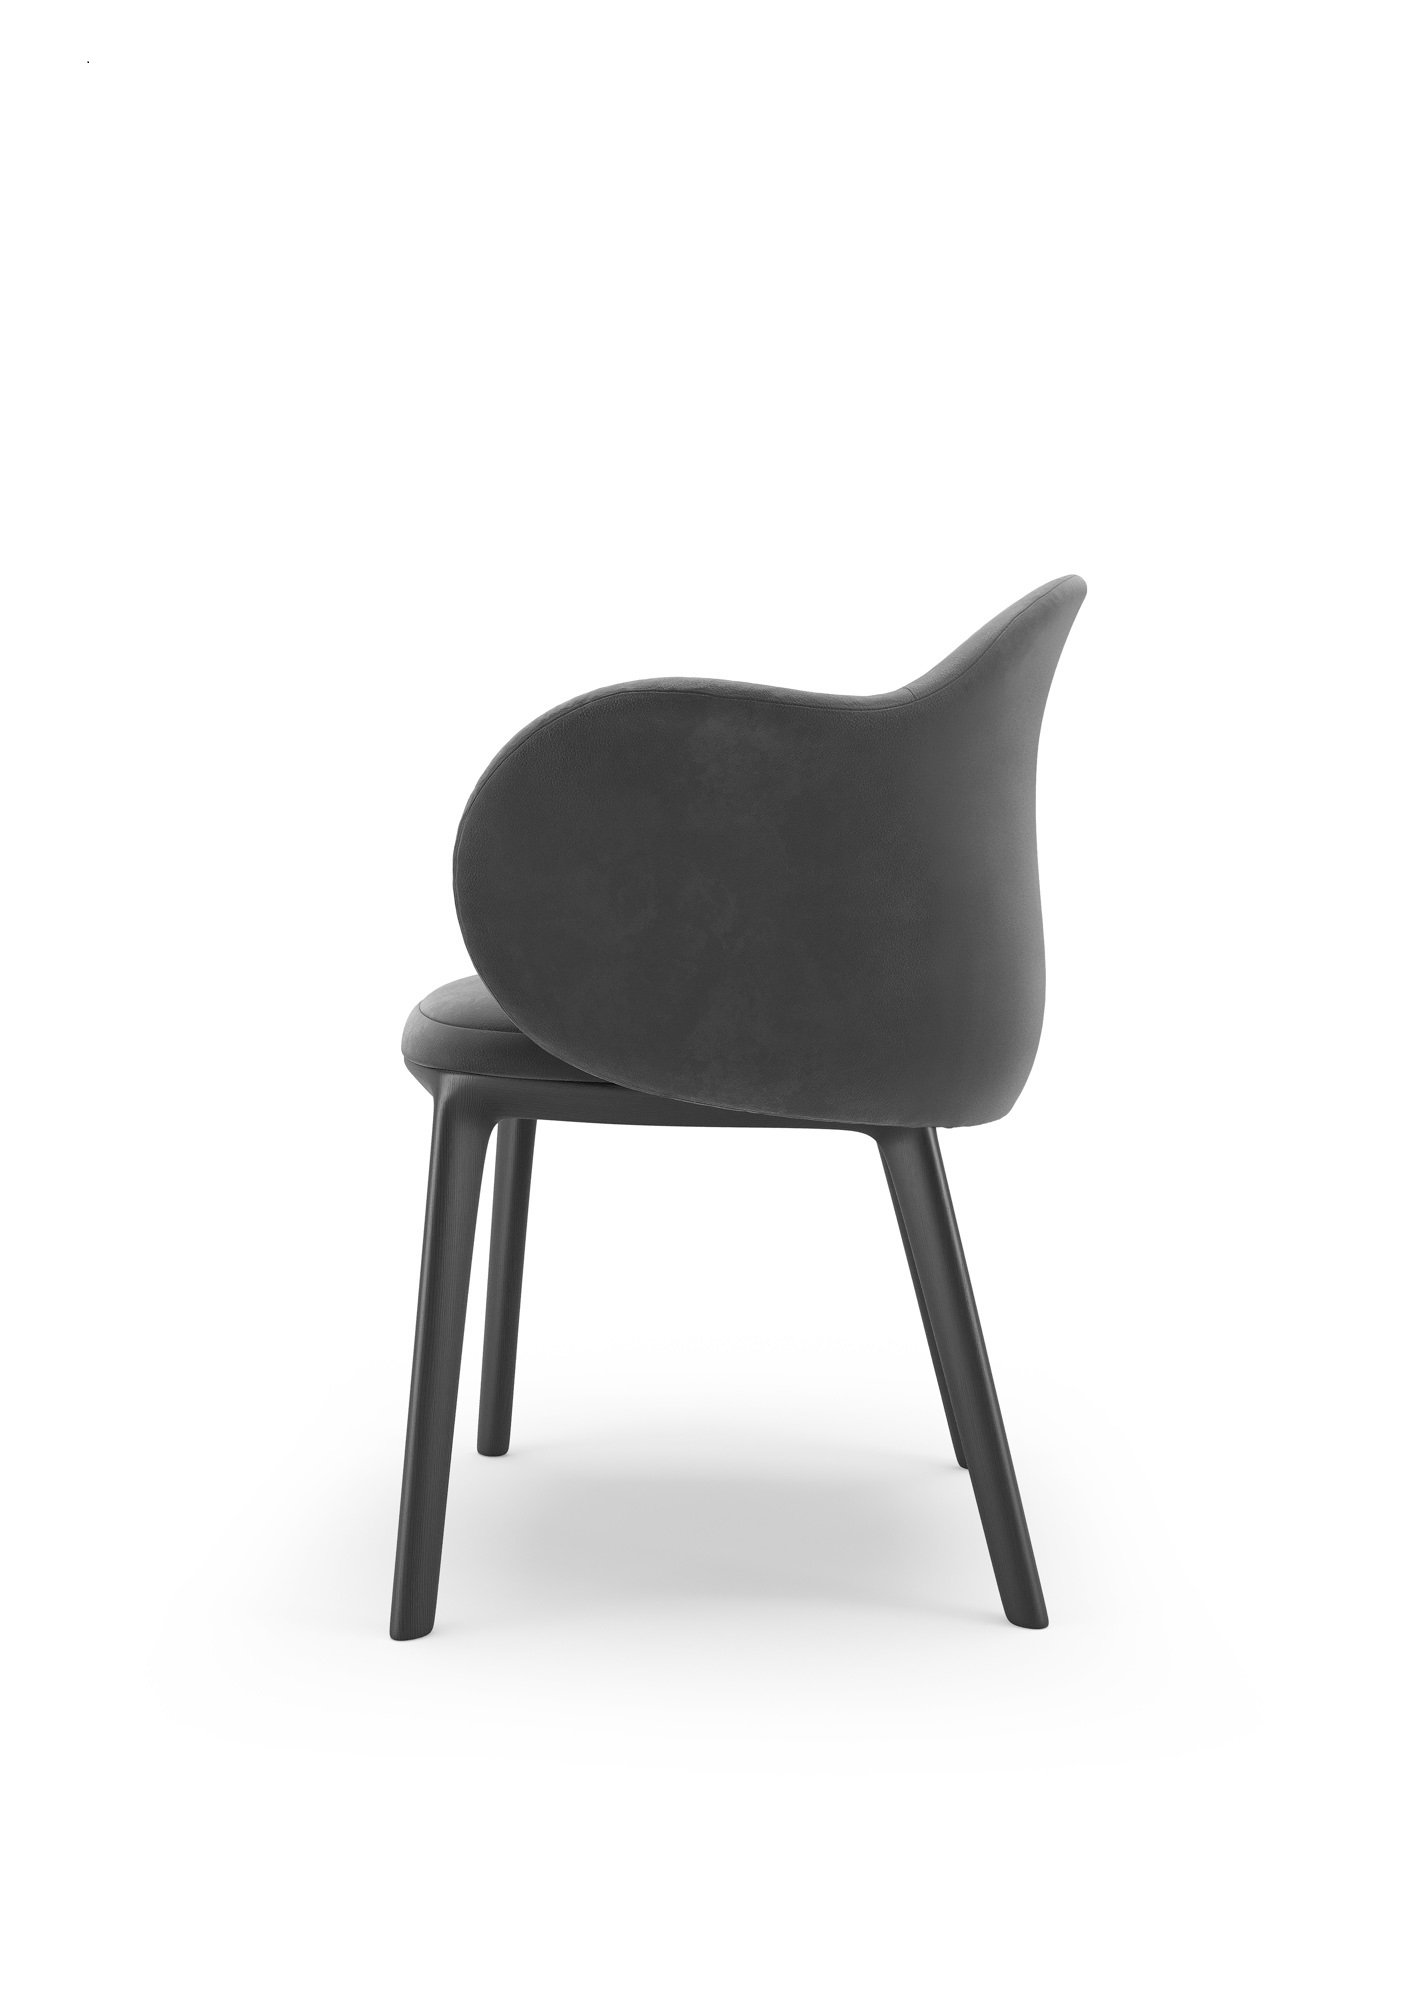 Oscar Chair from Fiam, designed by Patrick Norguet